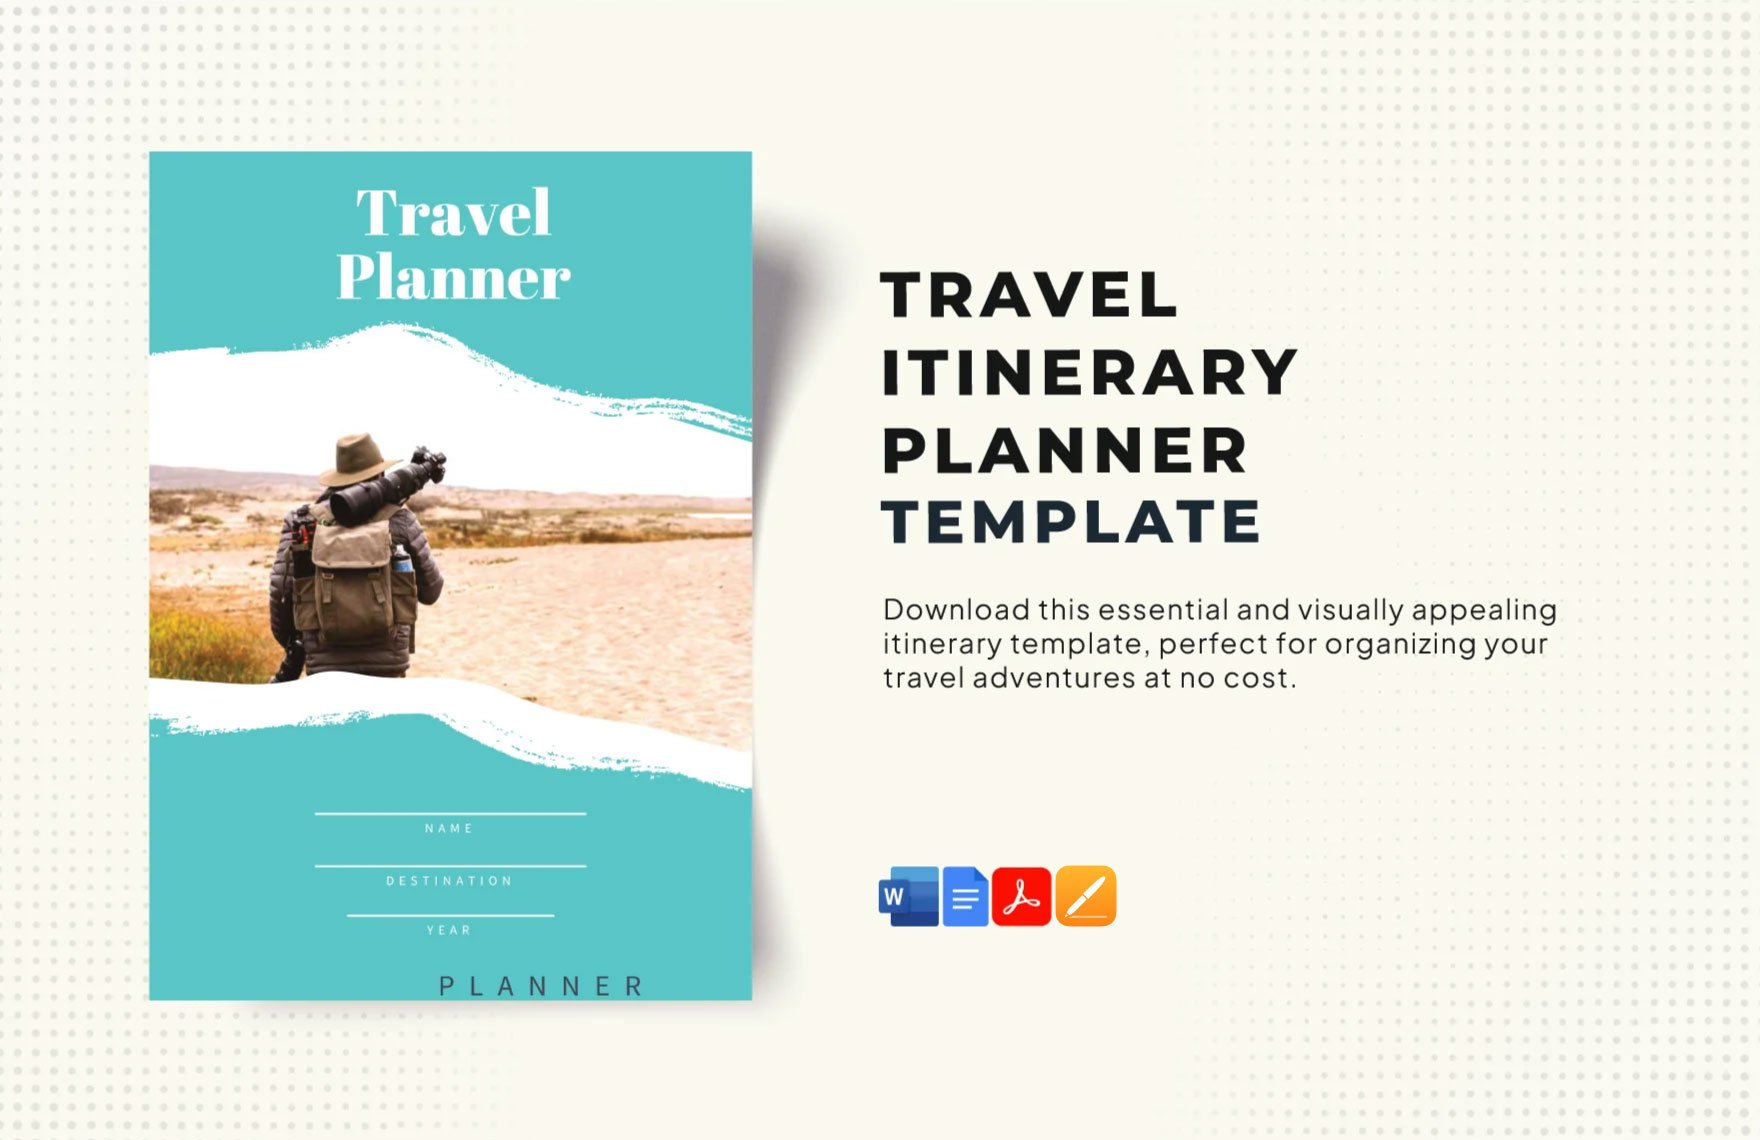 Travel Itinerary Planner Template in Word, Google Docs, PDF, Apple Pages